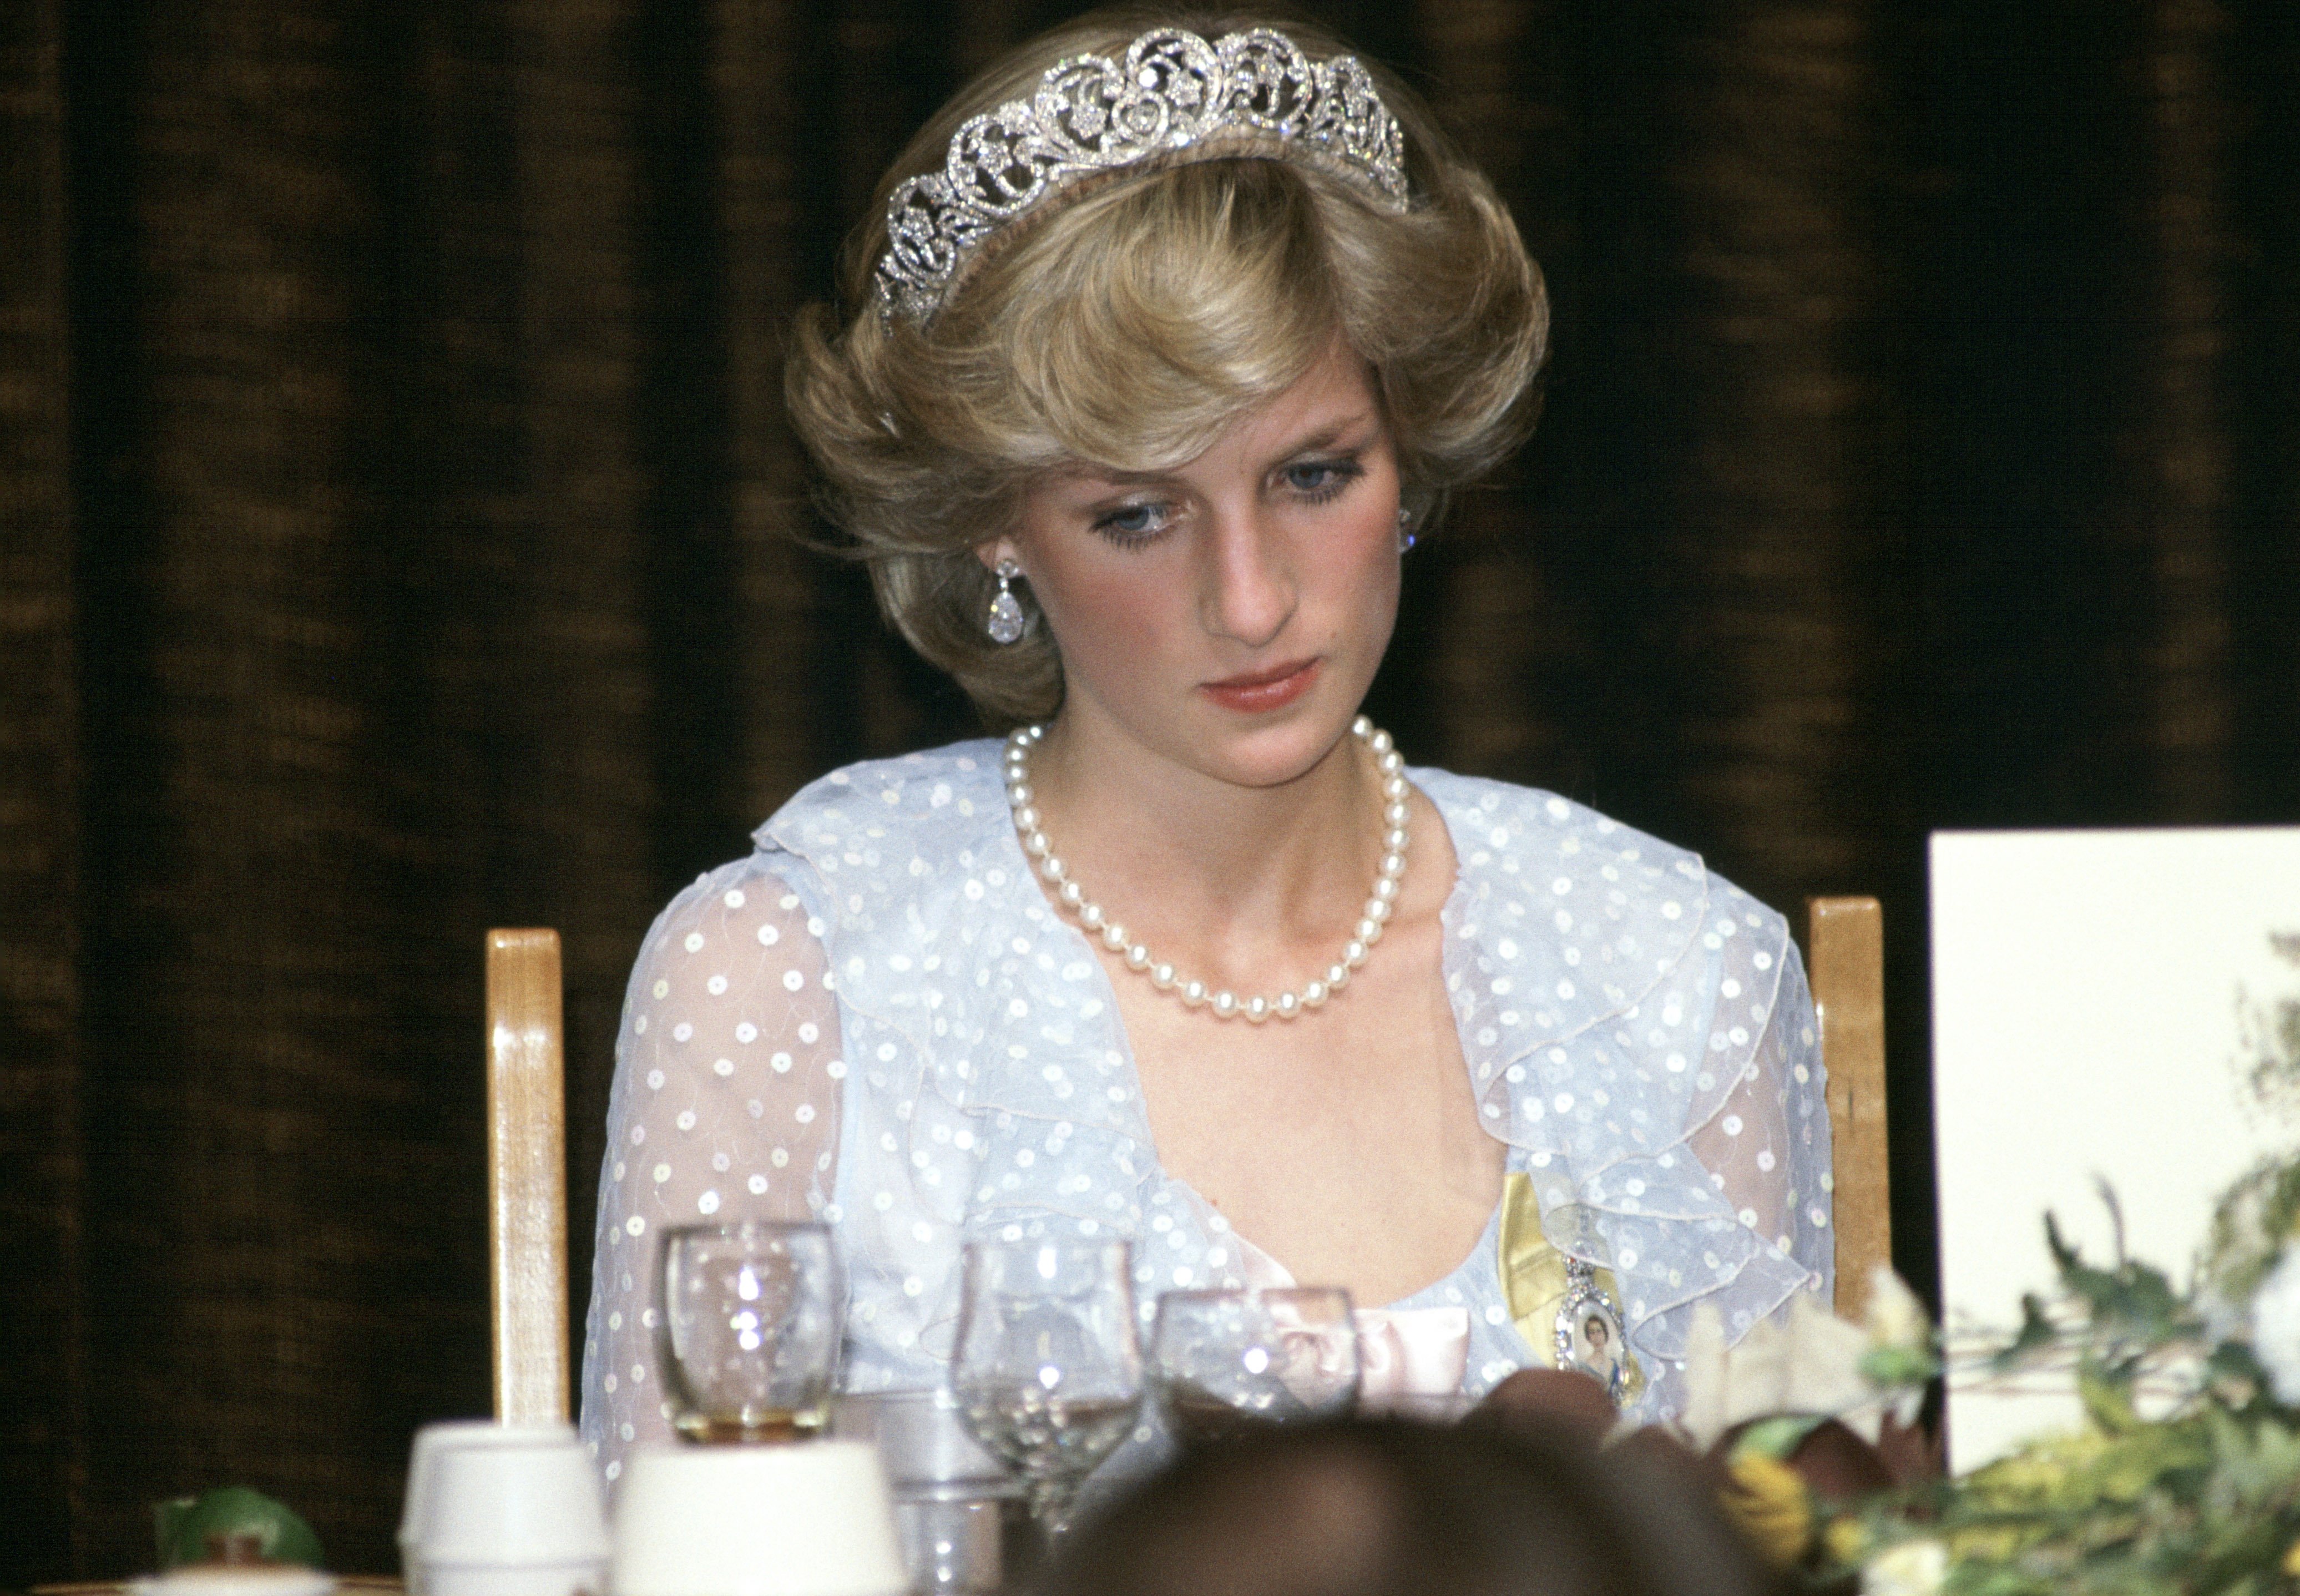 Princess Diana at a banquet in New Zealand wearing a blue chiffon evening dress on April 20, 1983 | Photo: Getty Images